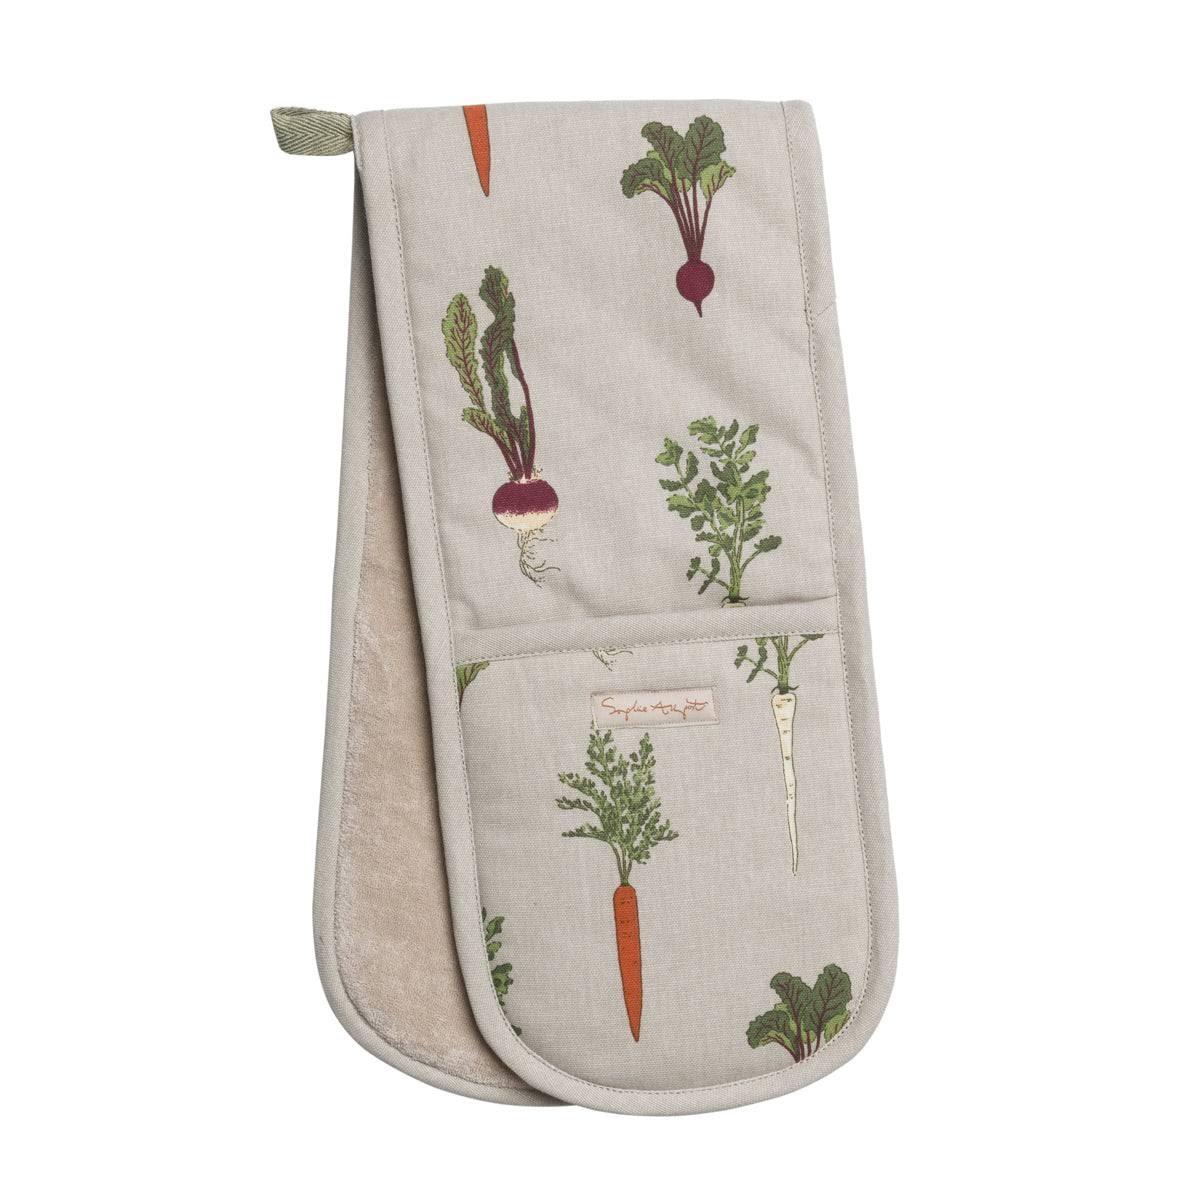 Home Grown Double Oven Glove by Sophie Allport